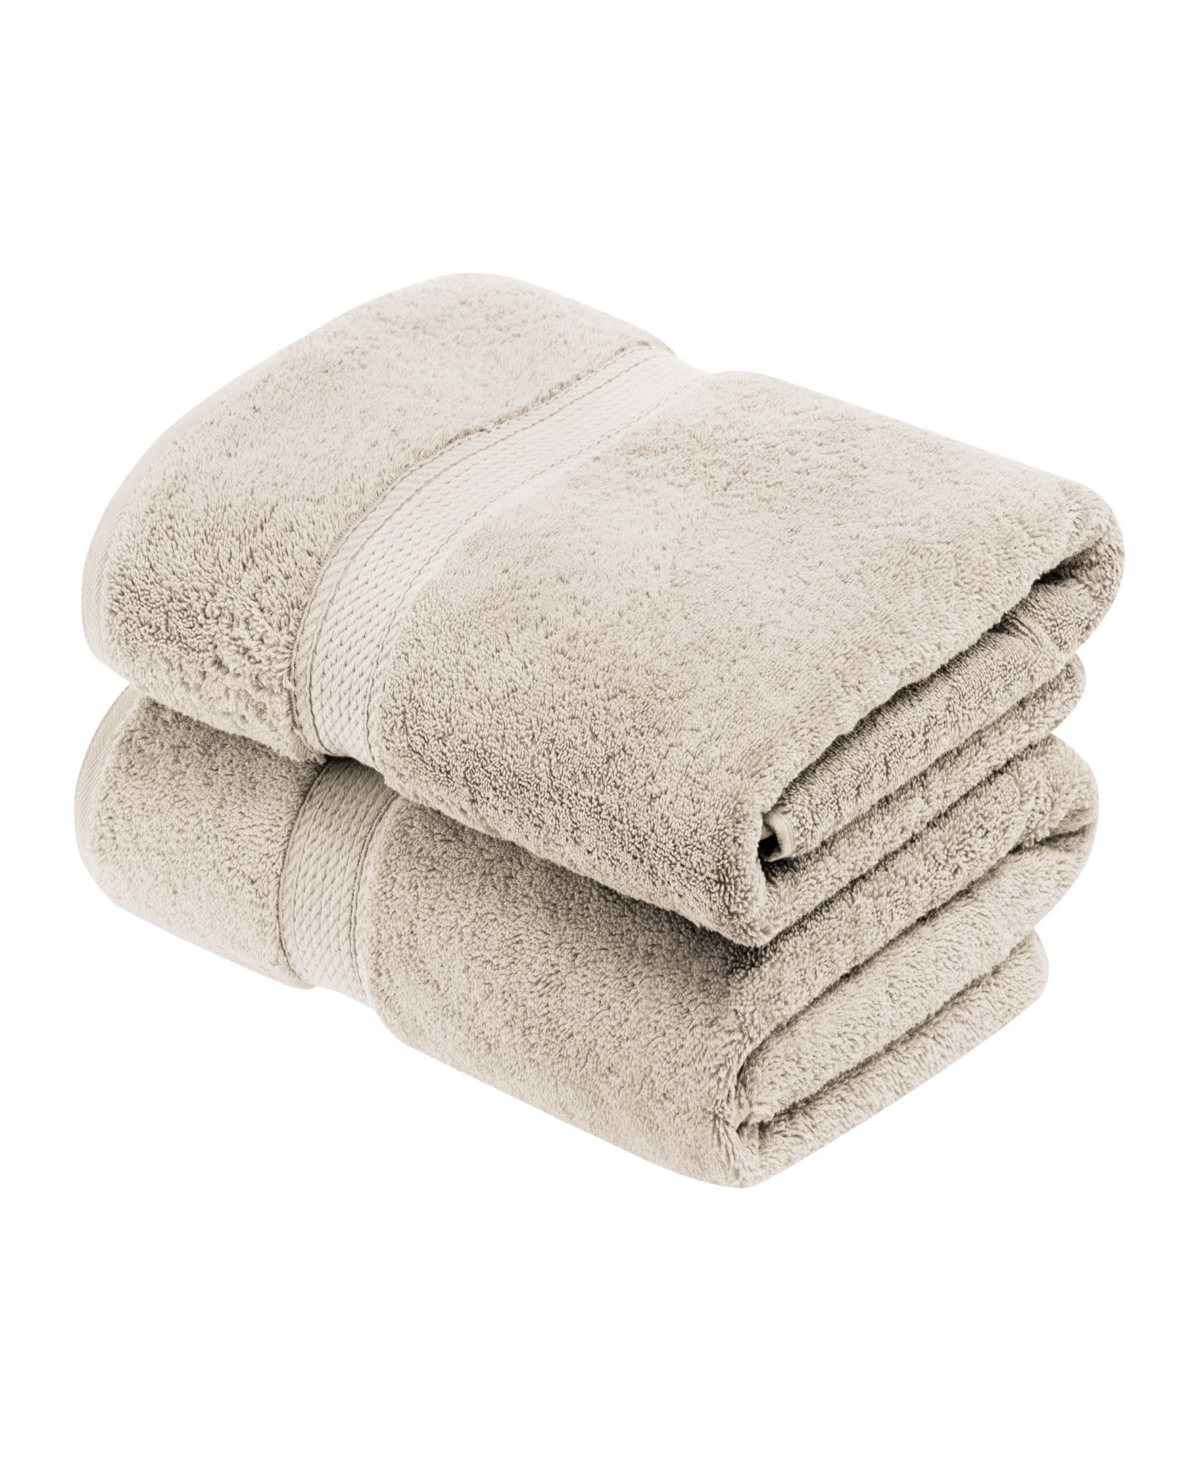 Superior Highly Absorbent Egyptian Cotton 2-piece Ultra Plush Solid Bath Towel Set Bedding In Stone